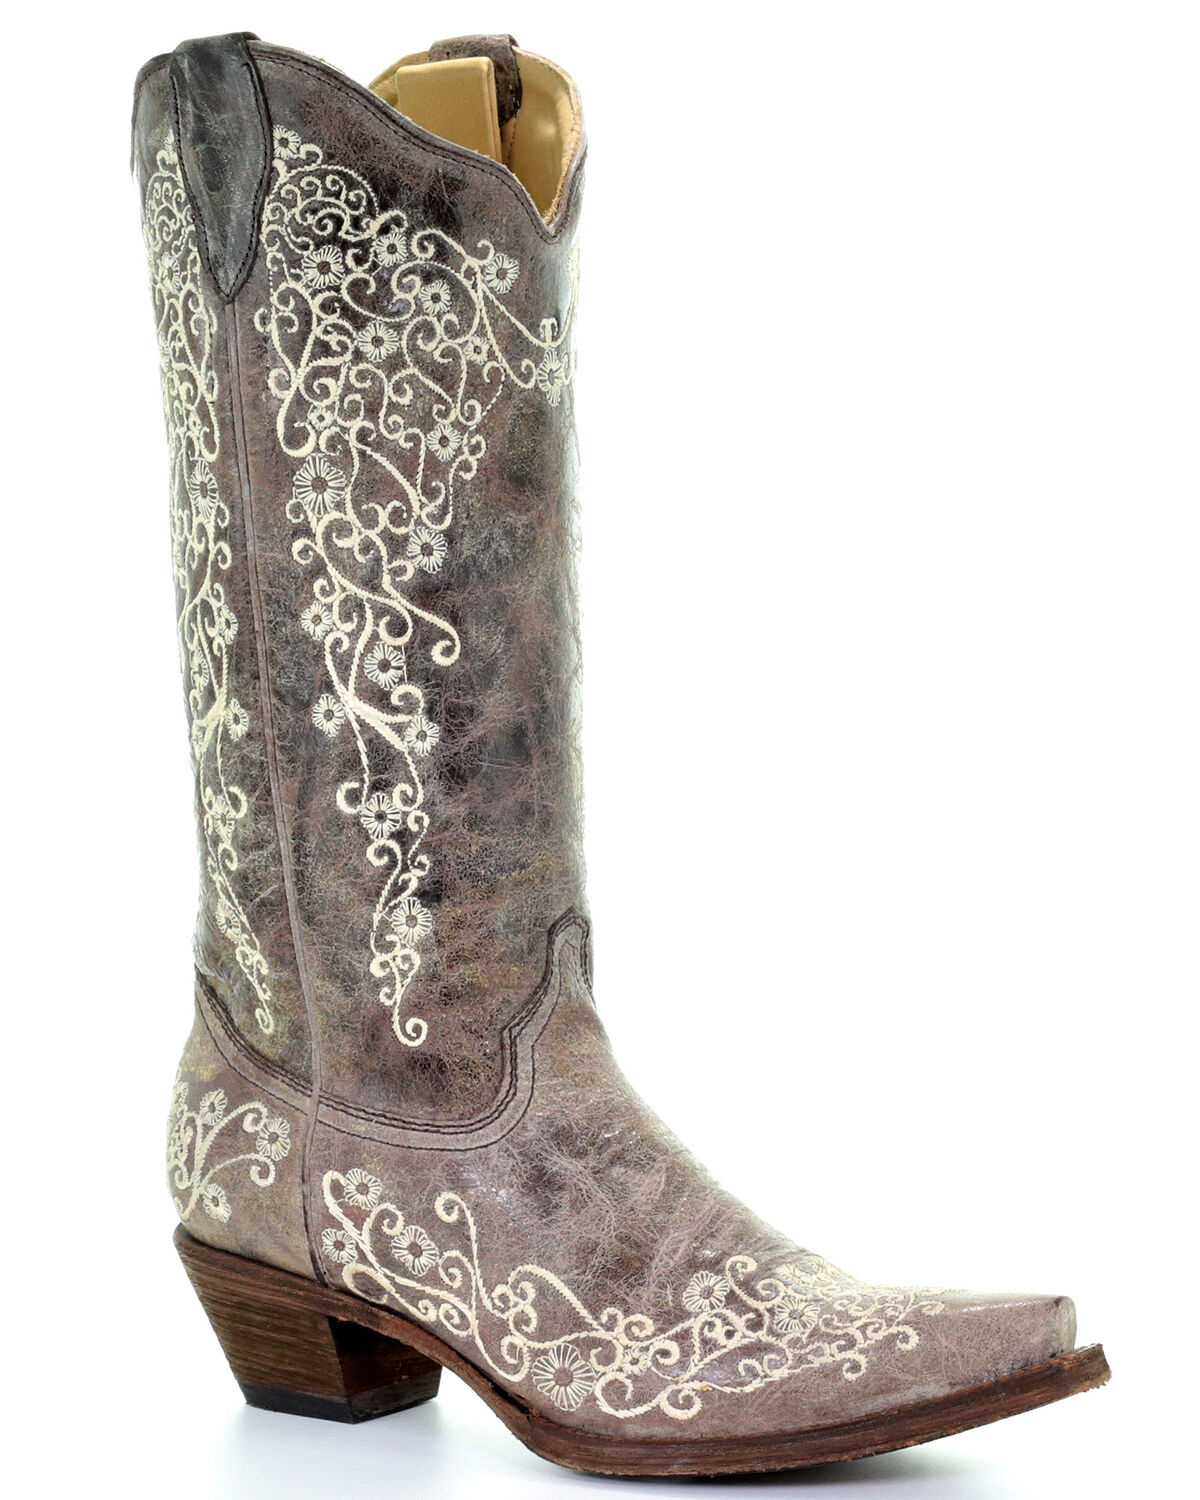 Women's Wedding Boots - Country Outfitter